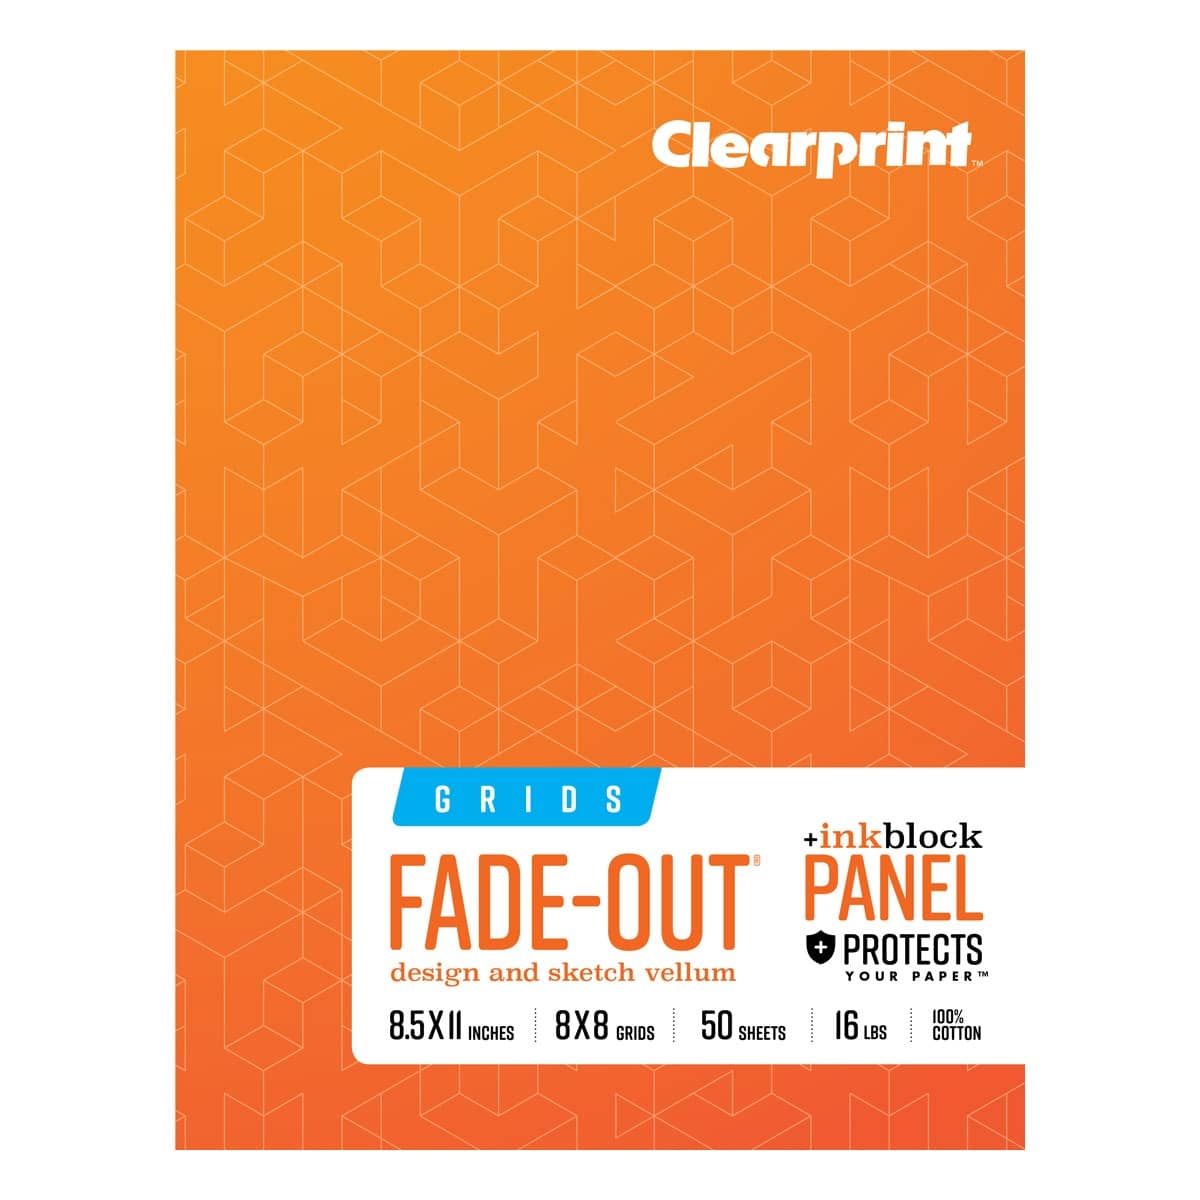 ink Block Panel (16lb, 50 Sheets) 8x8 grids - 8.5x11in